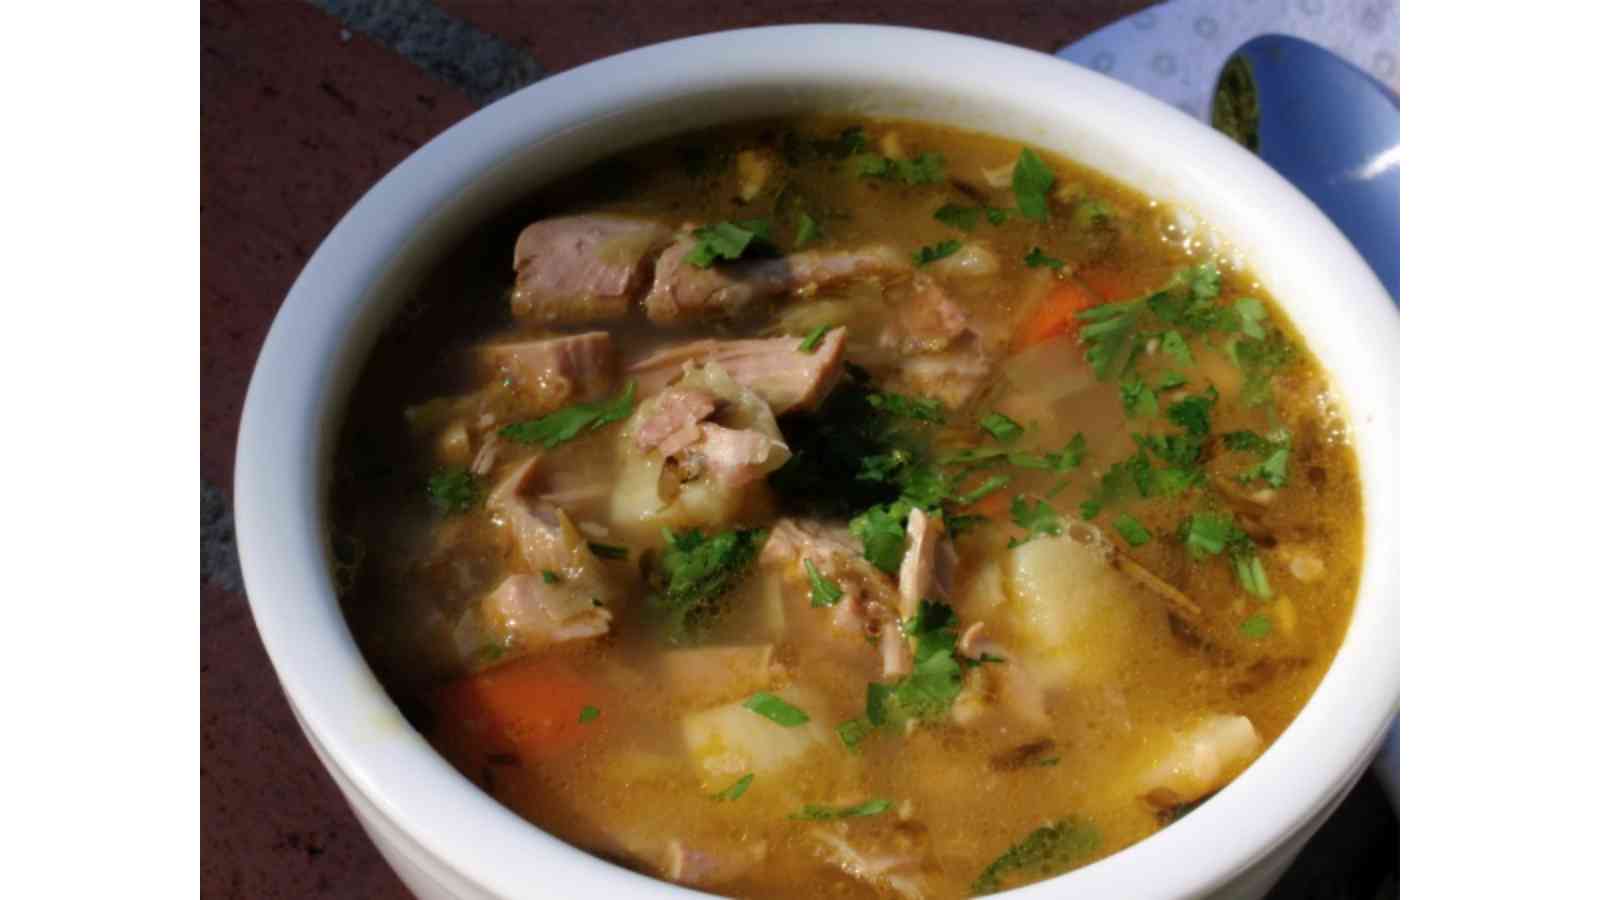 Turkey Neck Soup Day 2023: Date, History, Facts, Activities